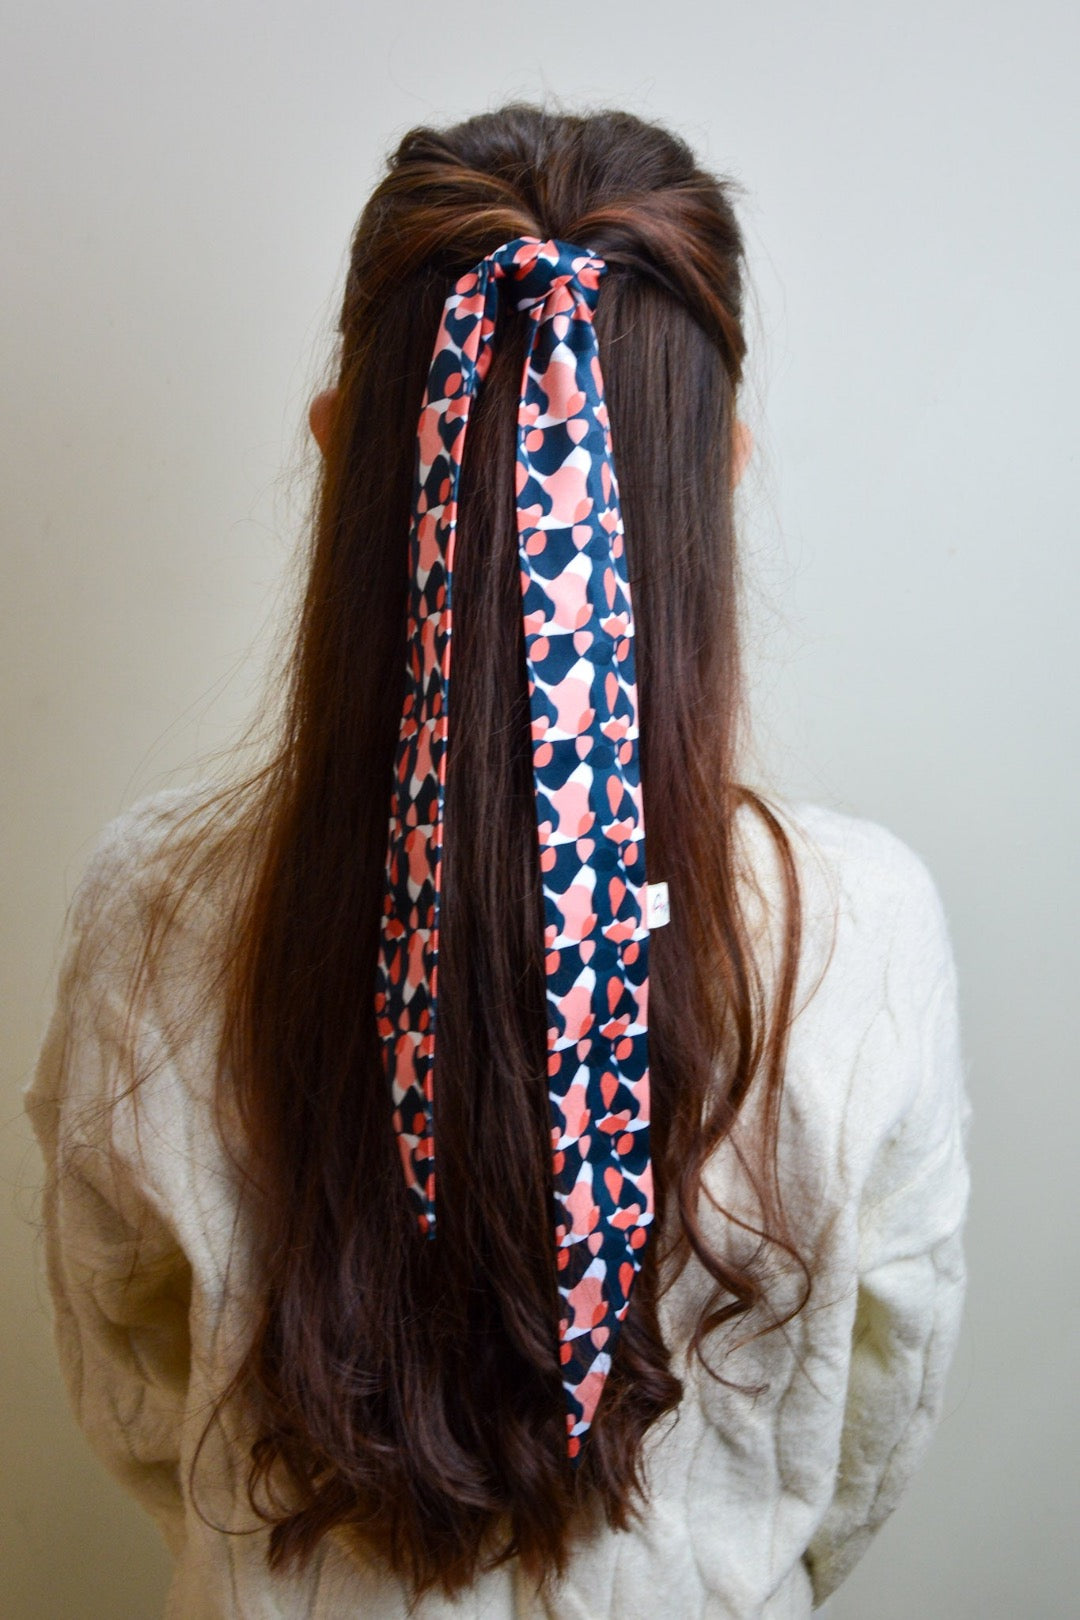 Back to December Hairtie Scarf